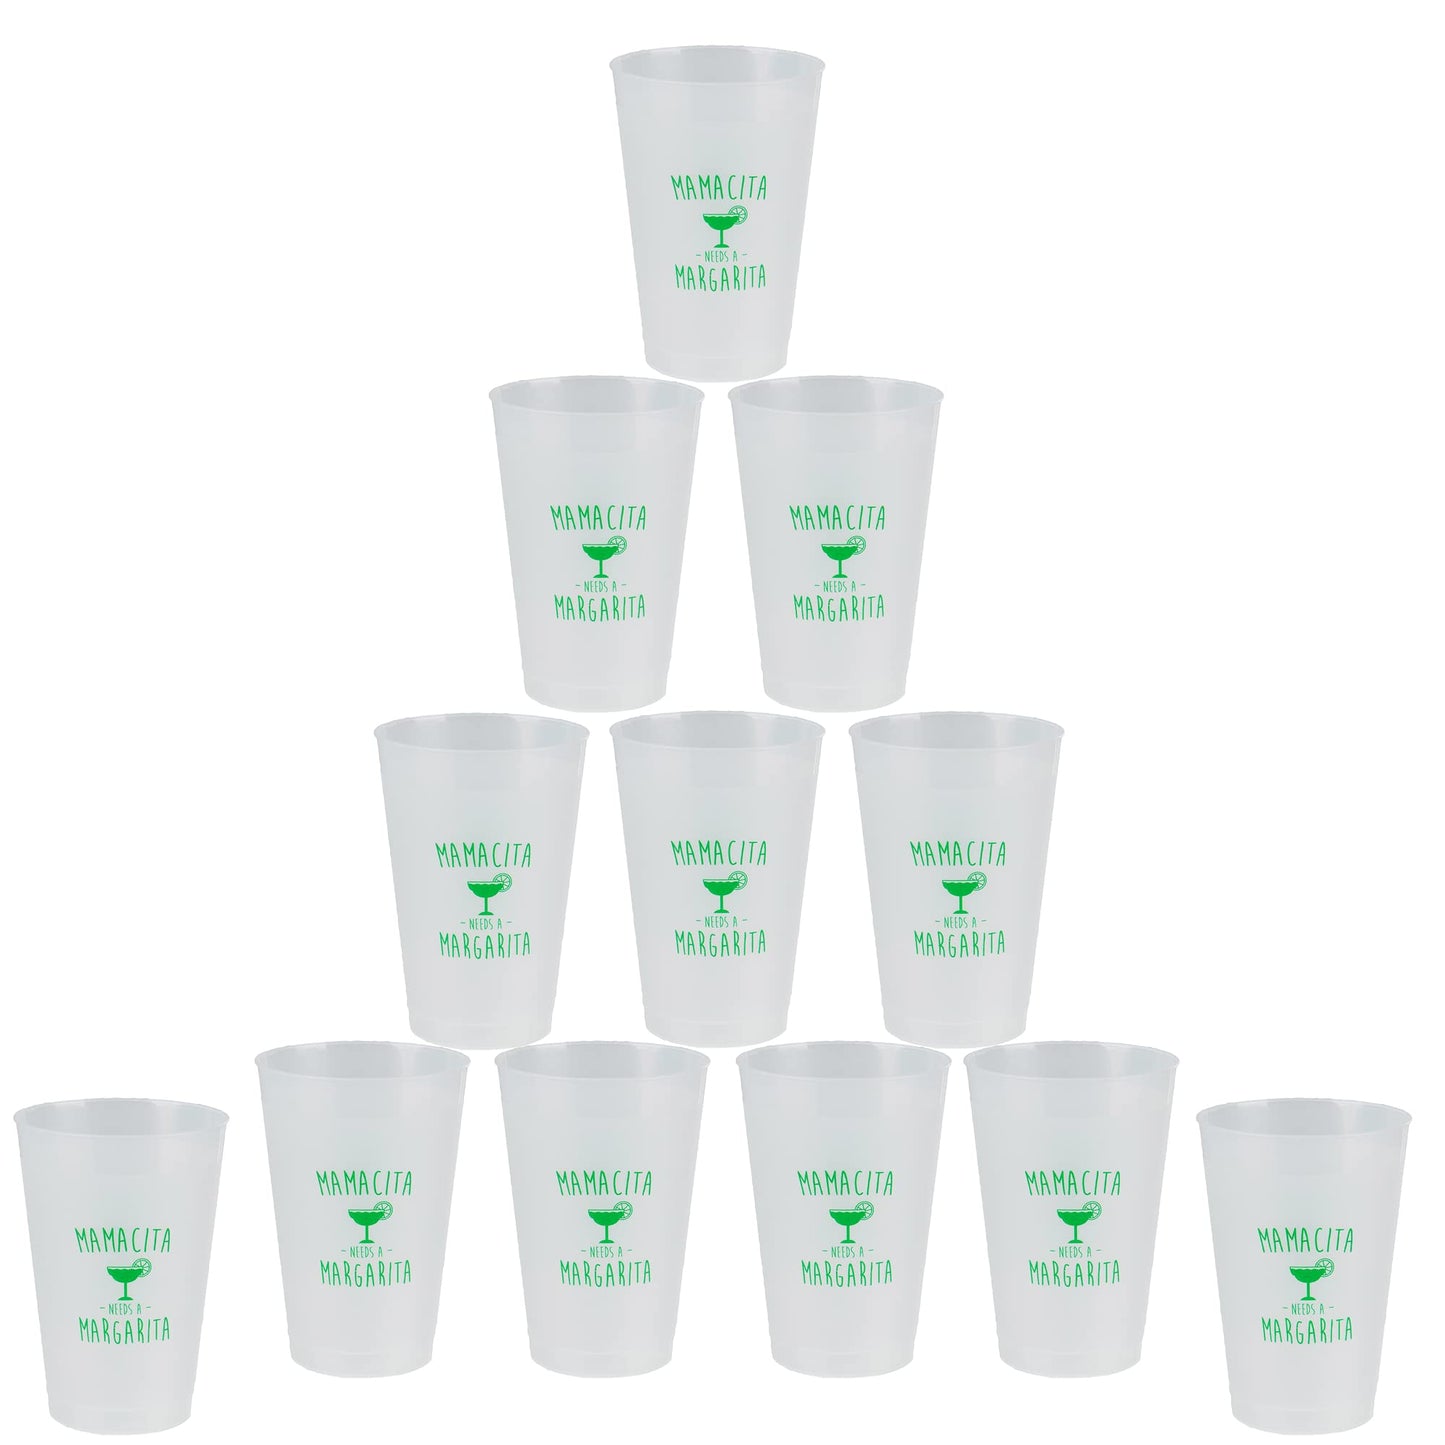 Frost Flex Party Cups by Funky Junque